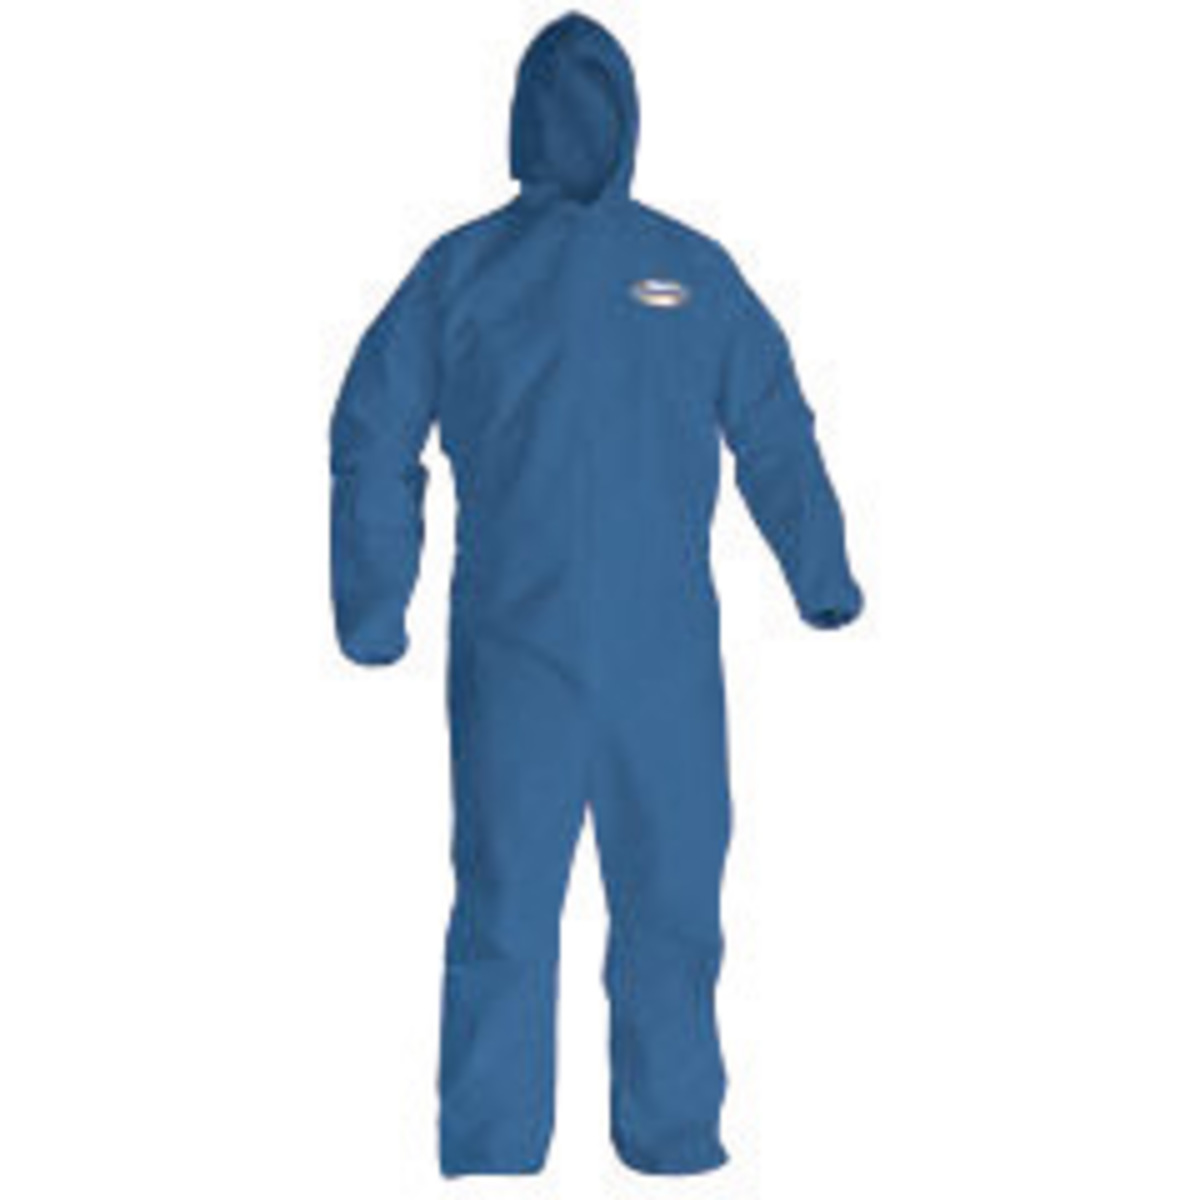 Kimberly-Clark Professional™ X-Large Blue KleenGuard™ A20 SMMMS Disposable Coveralls (Availability restrictions apply.)